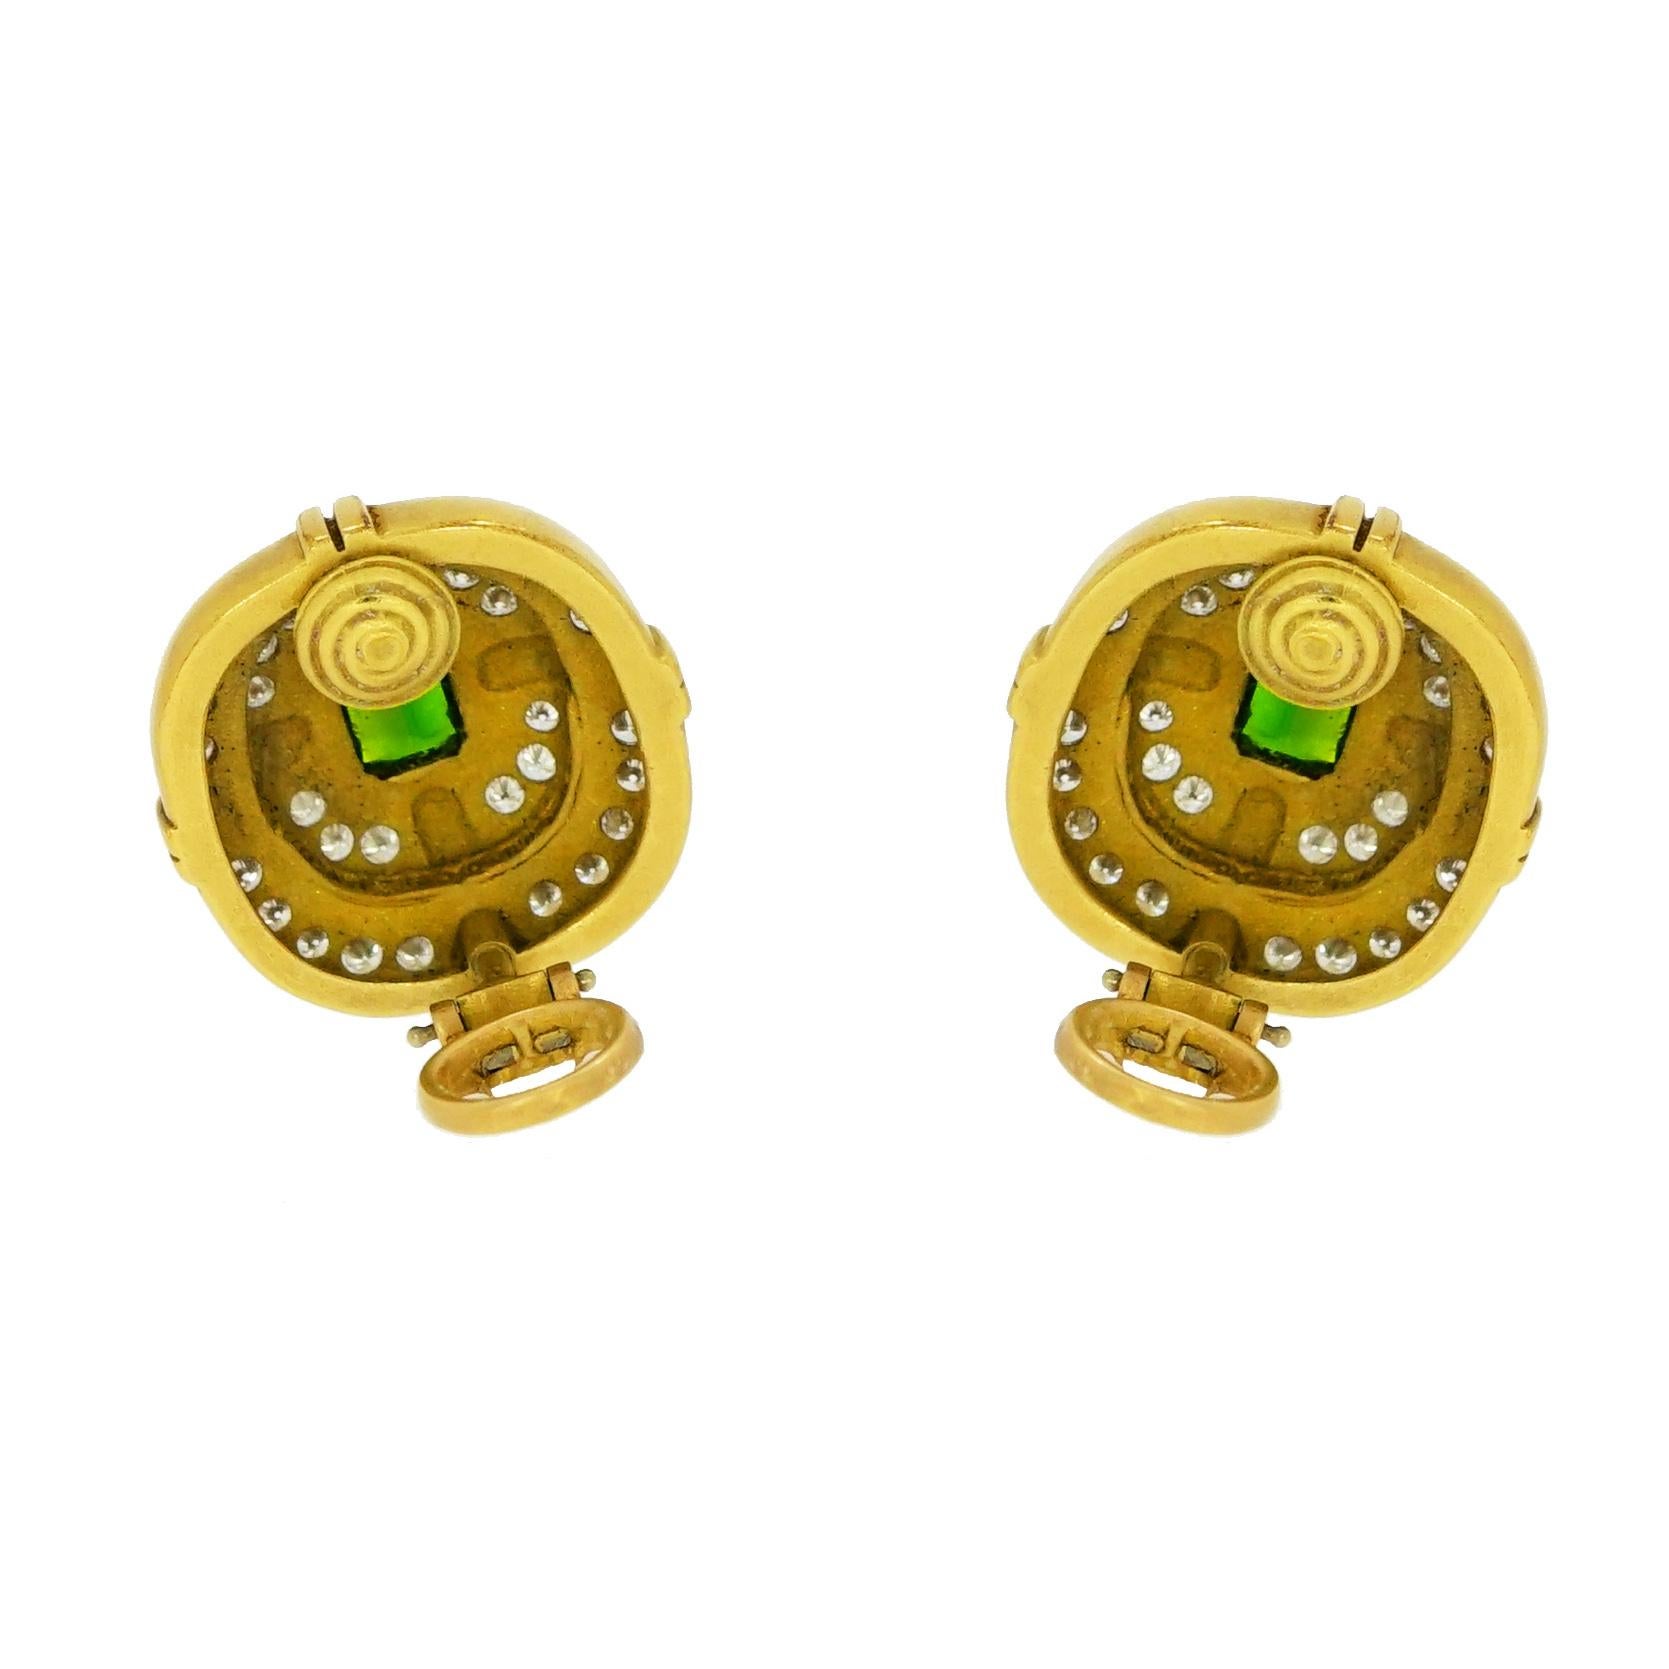 Looking for a intricately Cushion shaped halo design earrings in Yellow Gold... This is it!!
A non pierced clip backs centering an emerald cut Green Tourmaline and is accented by a double halo of 64 round white diamonds.
Measures approximately